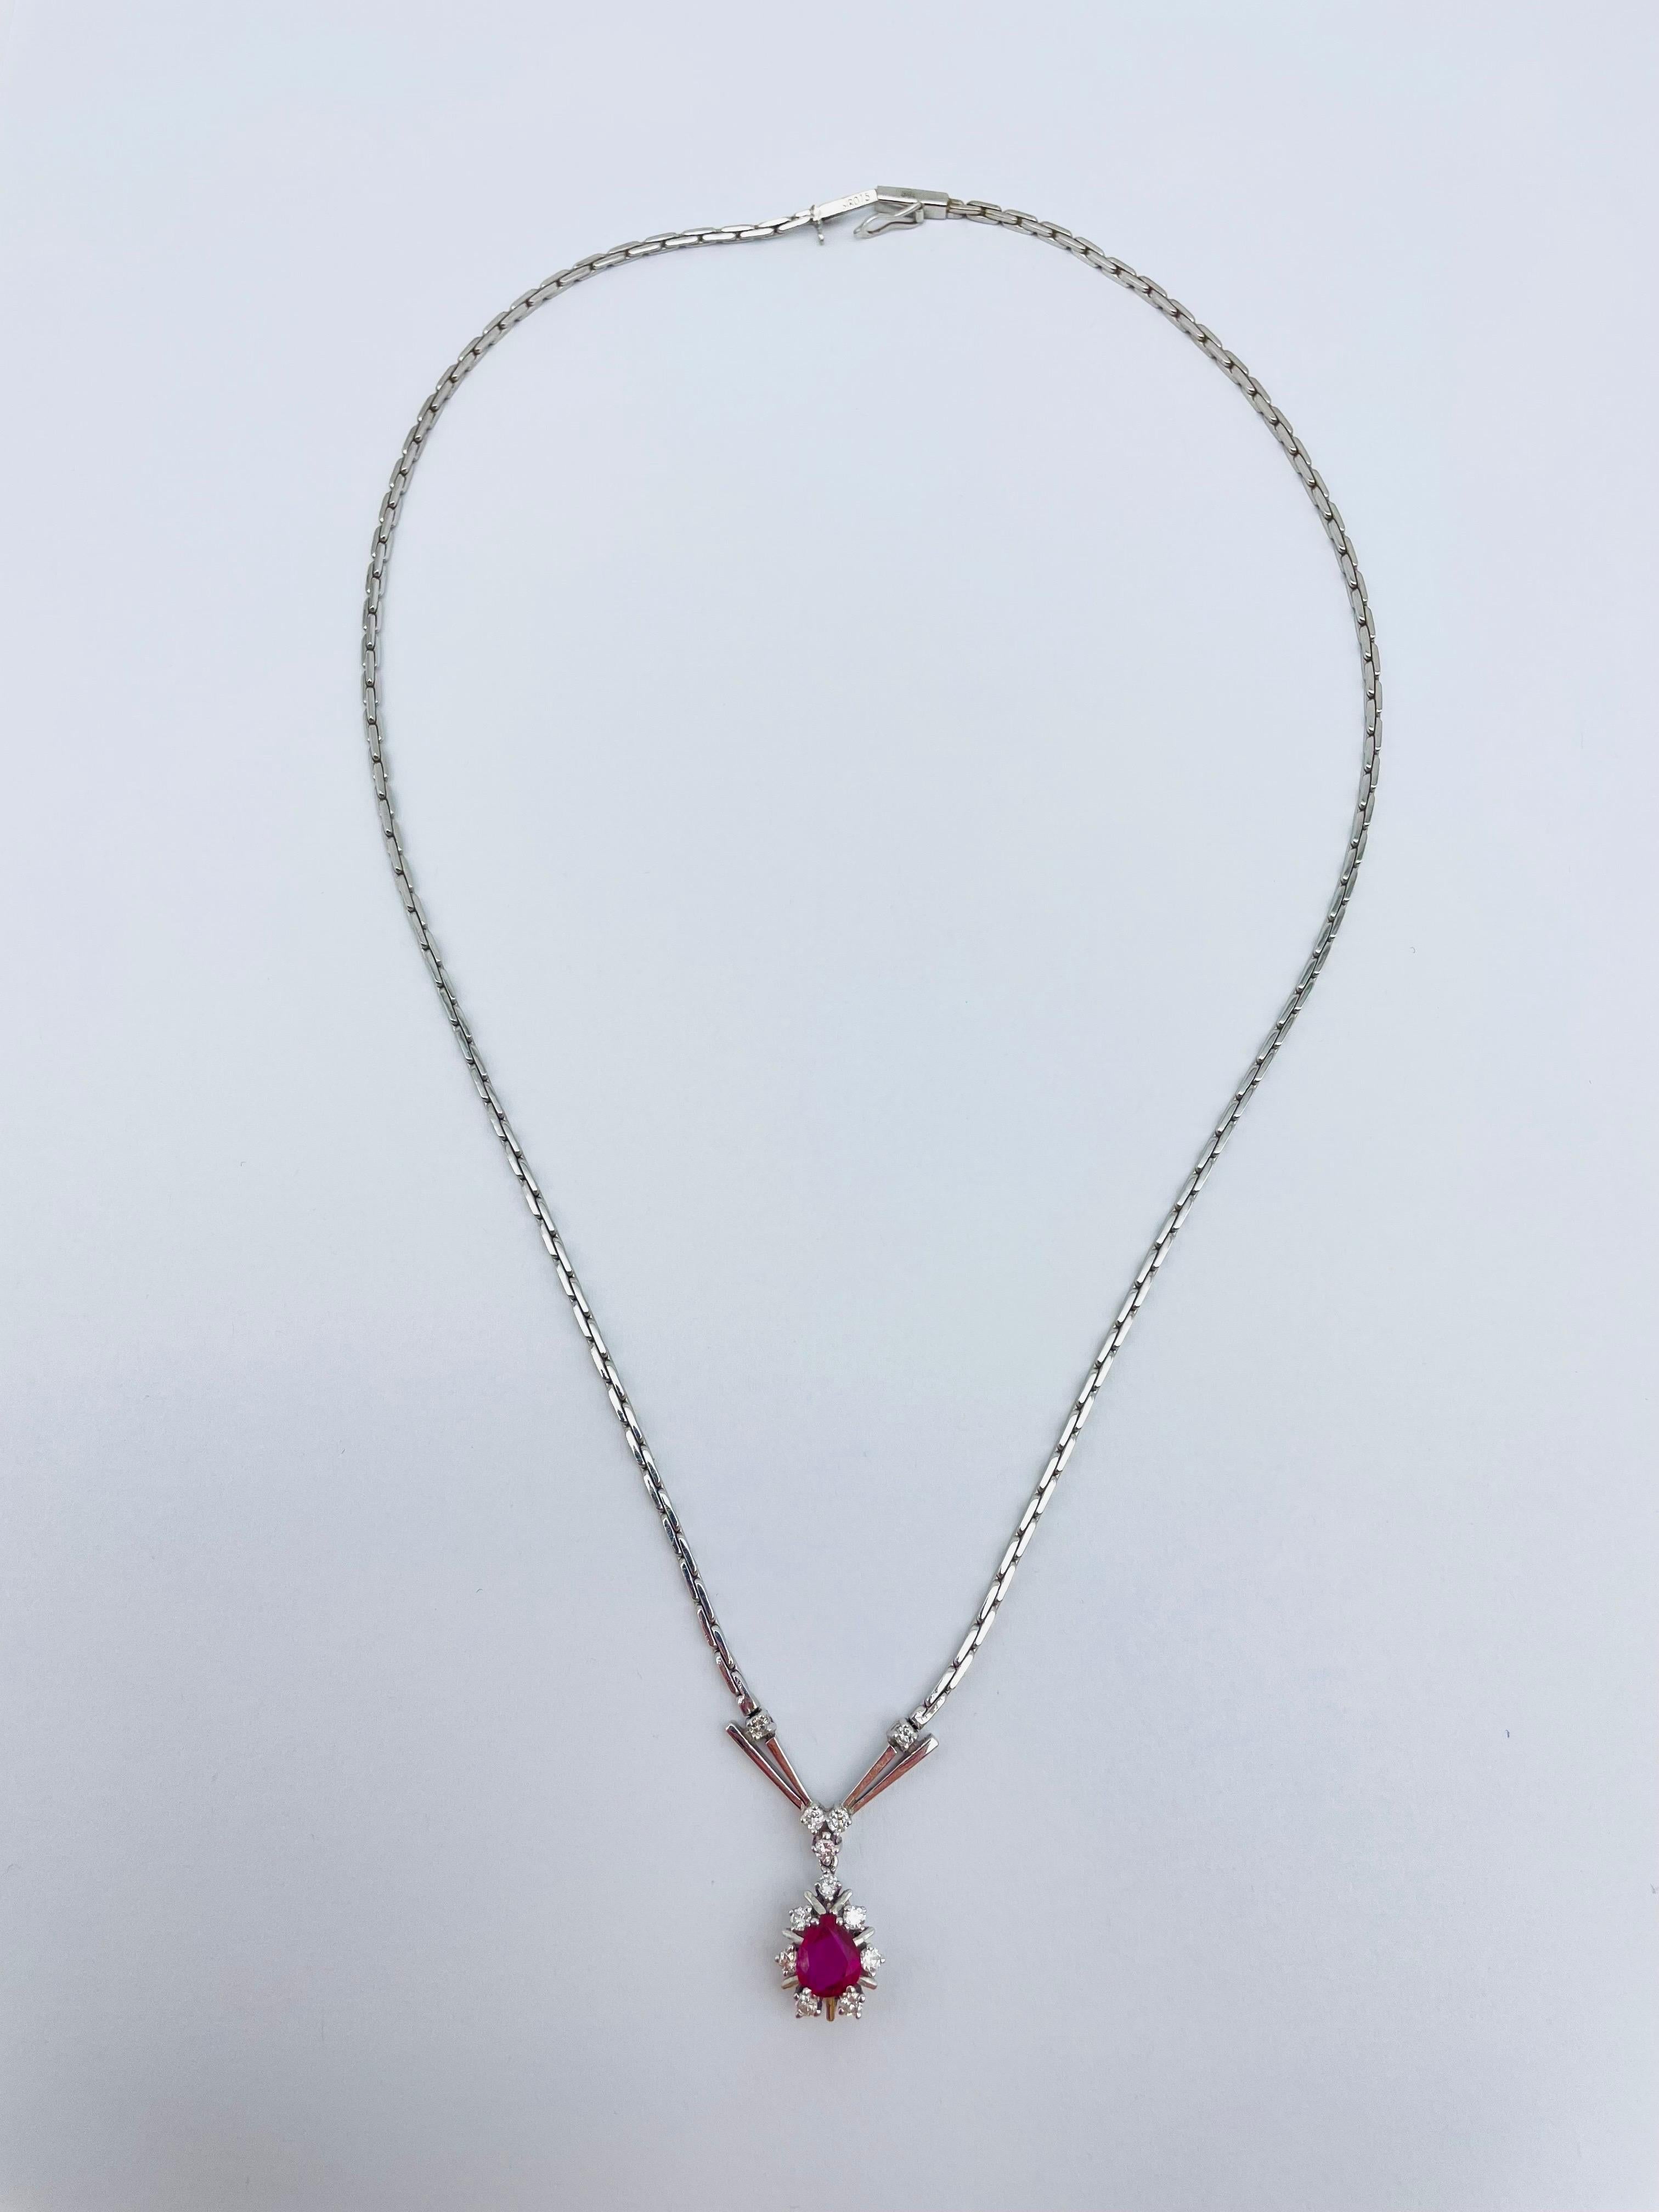 Adorn yourself with this dazzling 14k white gold necklace that exudes pure elegance and sophistication. The pendant features a stunning red colored stone, adding a touch of color and vibrancy to your look. The stone is expertly cut and polished to